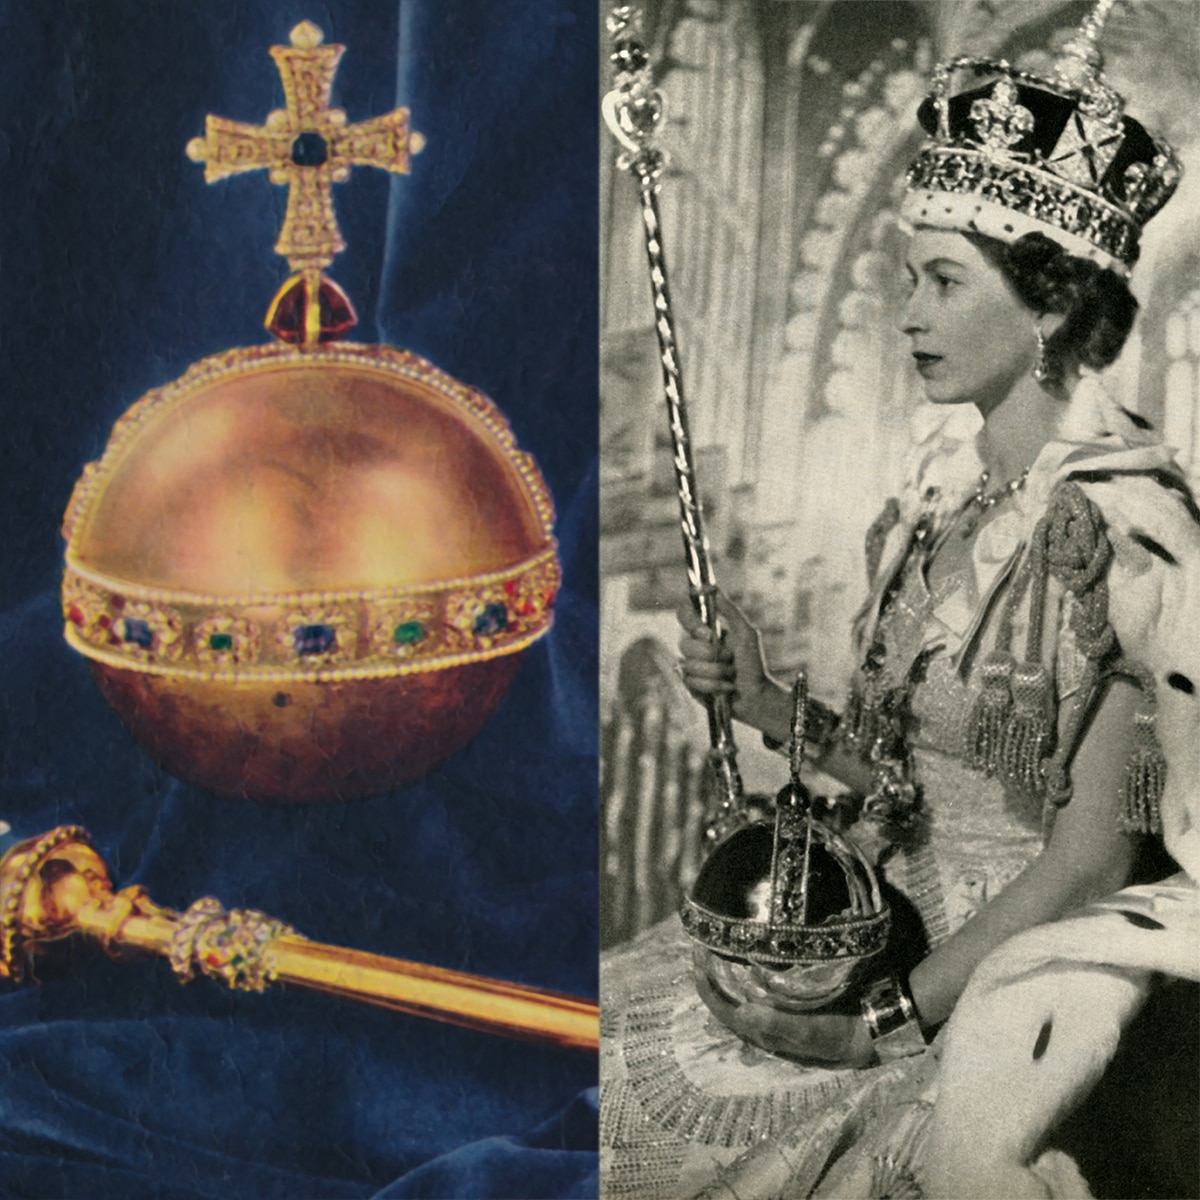 Queen Elizabeth, The Sovereign's Orb, Crown Jewels for Coronation